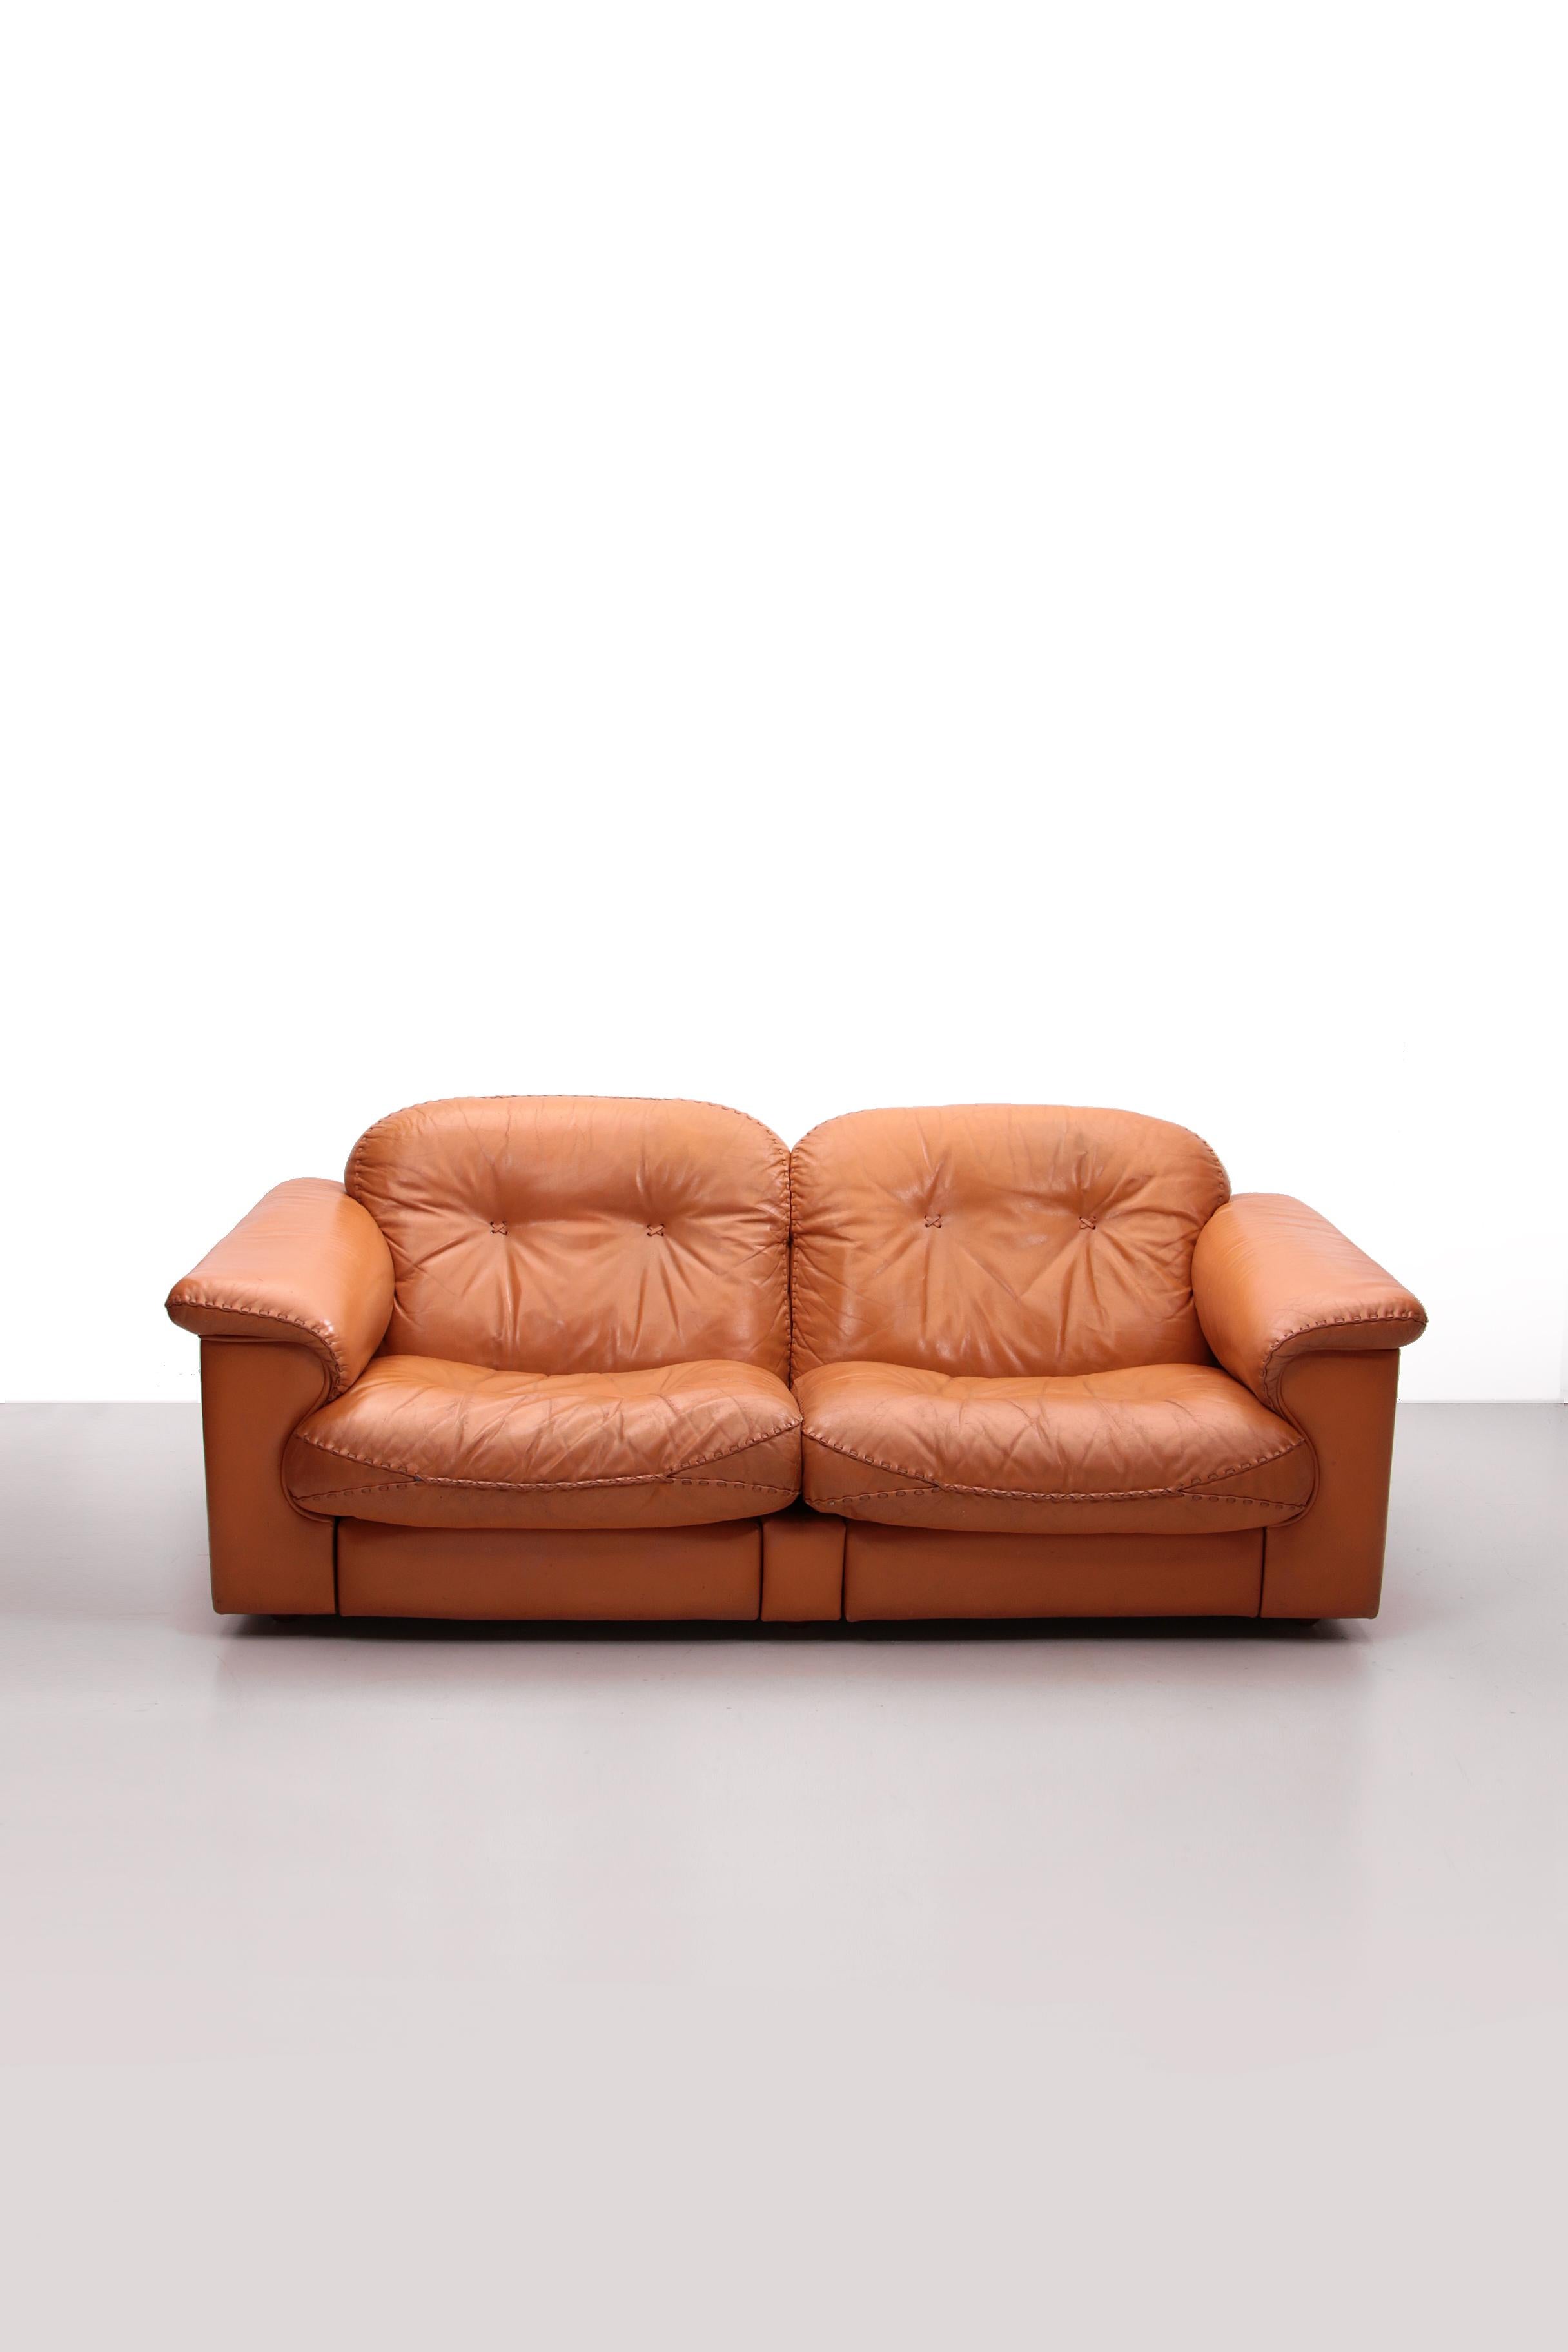 Mid-Century Modern De Sede DS101 Two Seater Leather and Gognac Color, 1970 For Sale